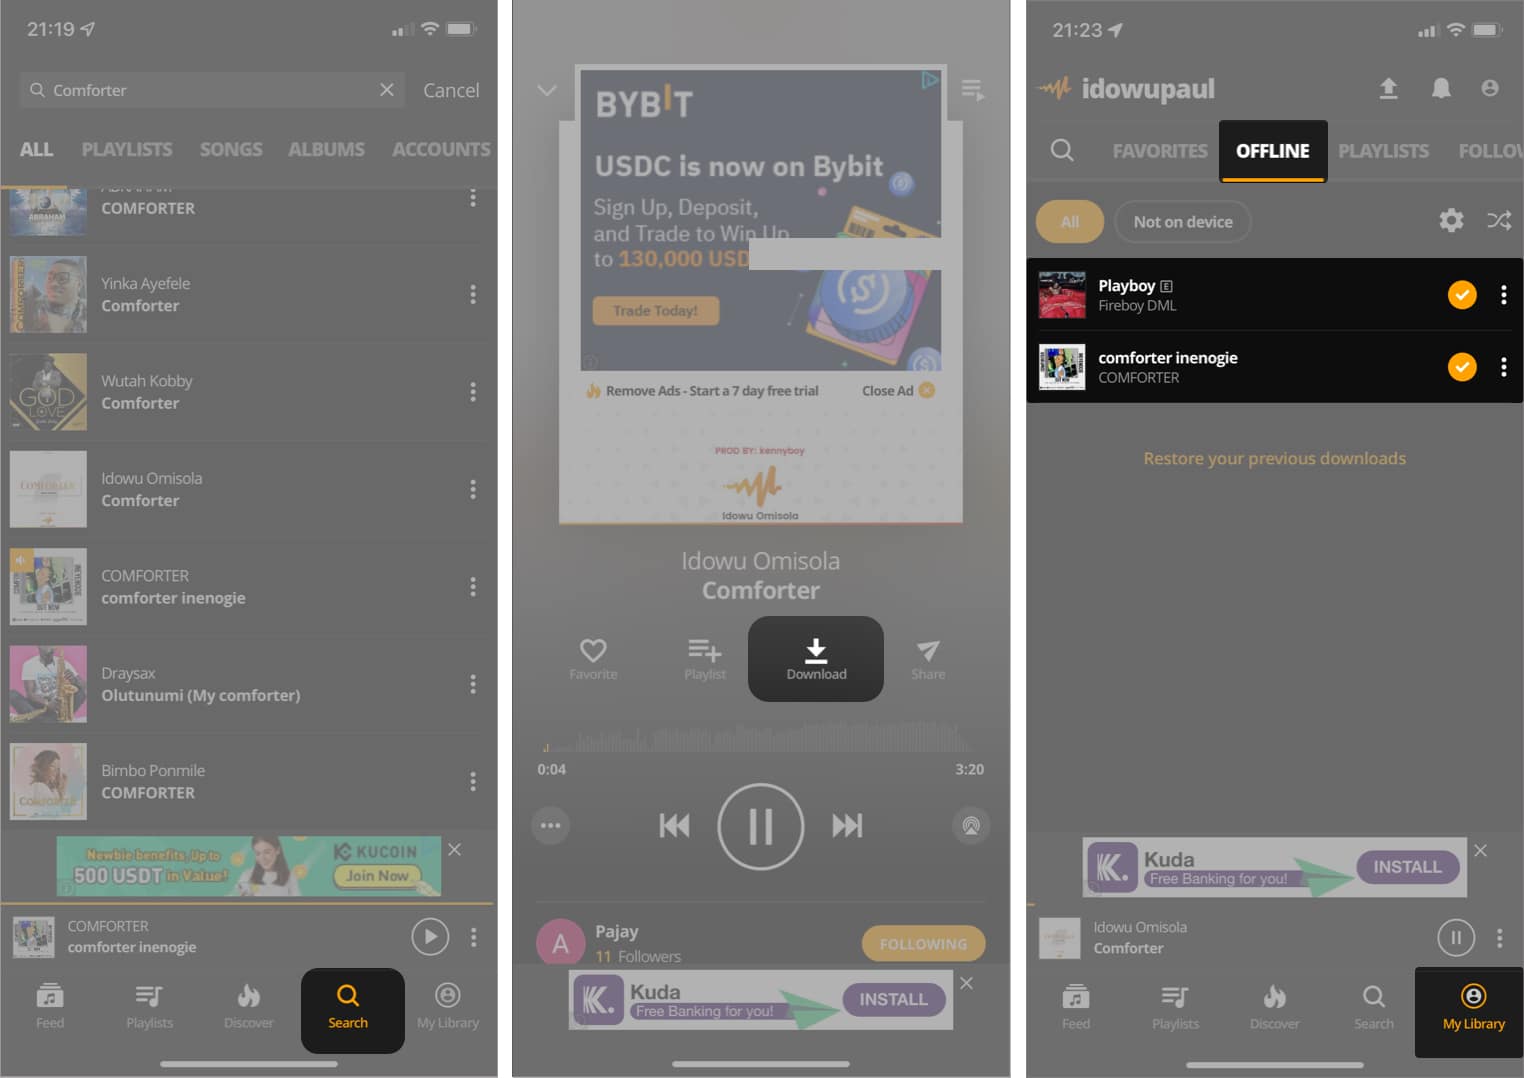 Audiomack app to download free music on iPhone